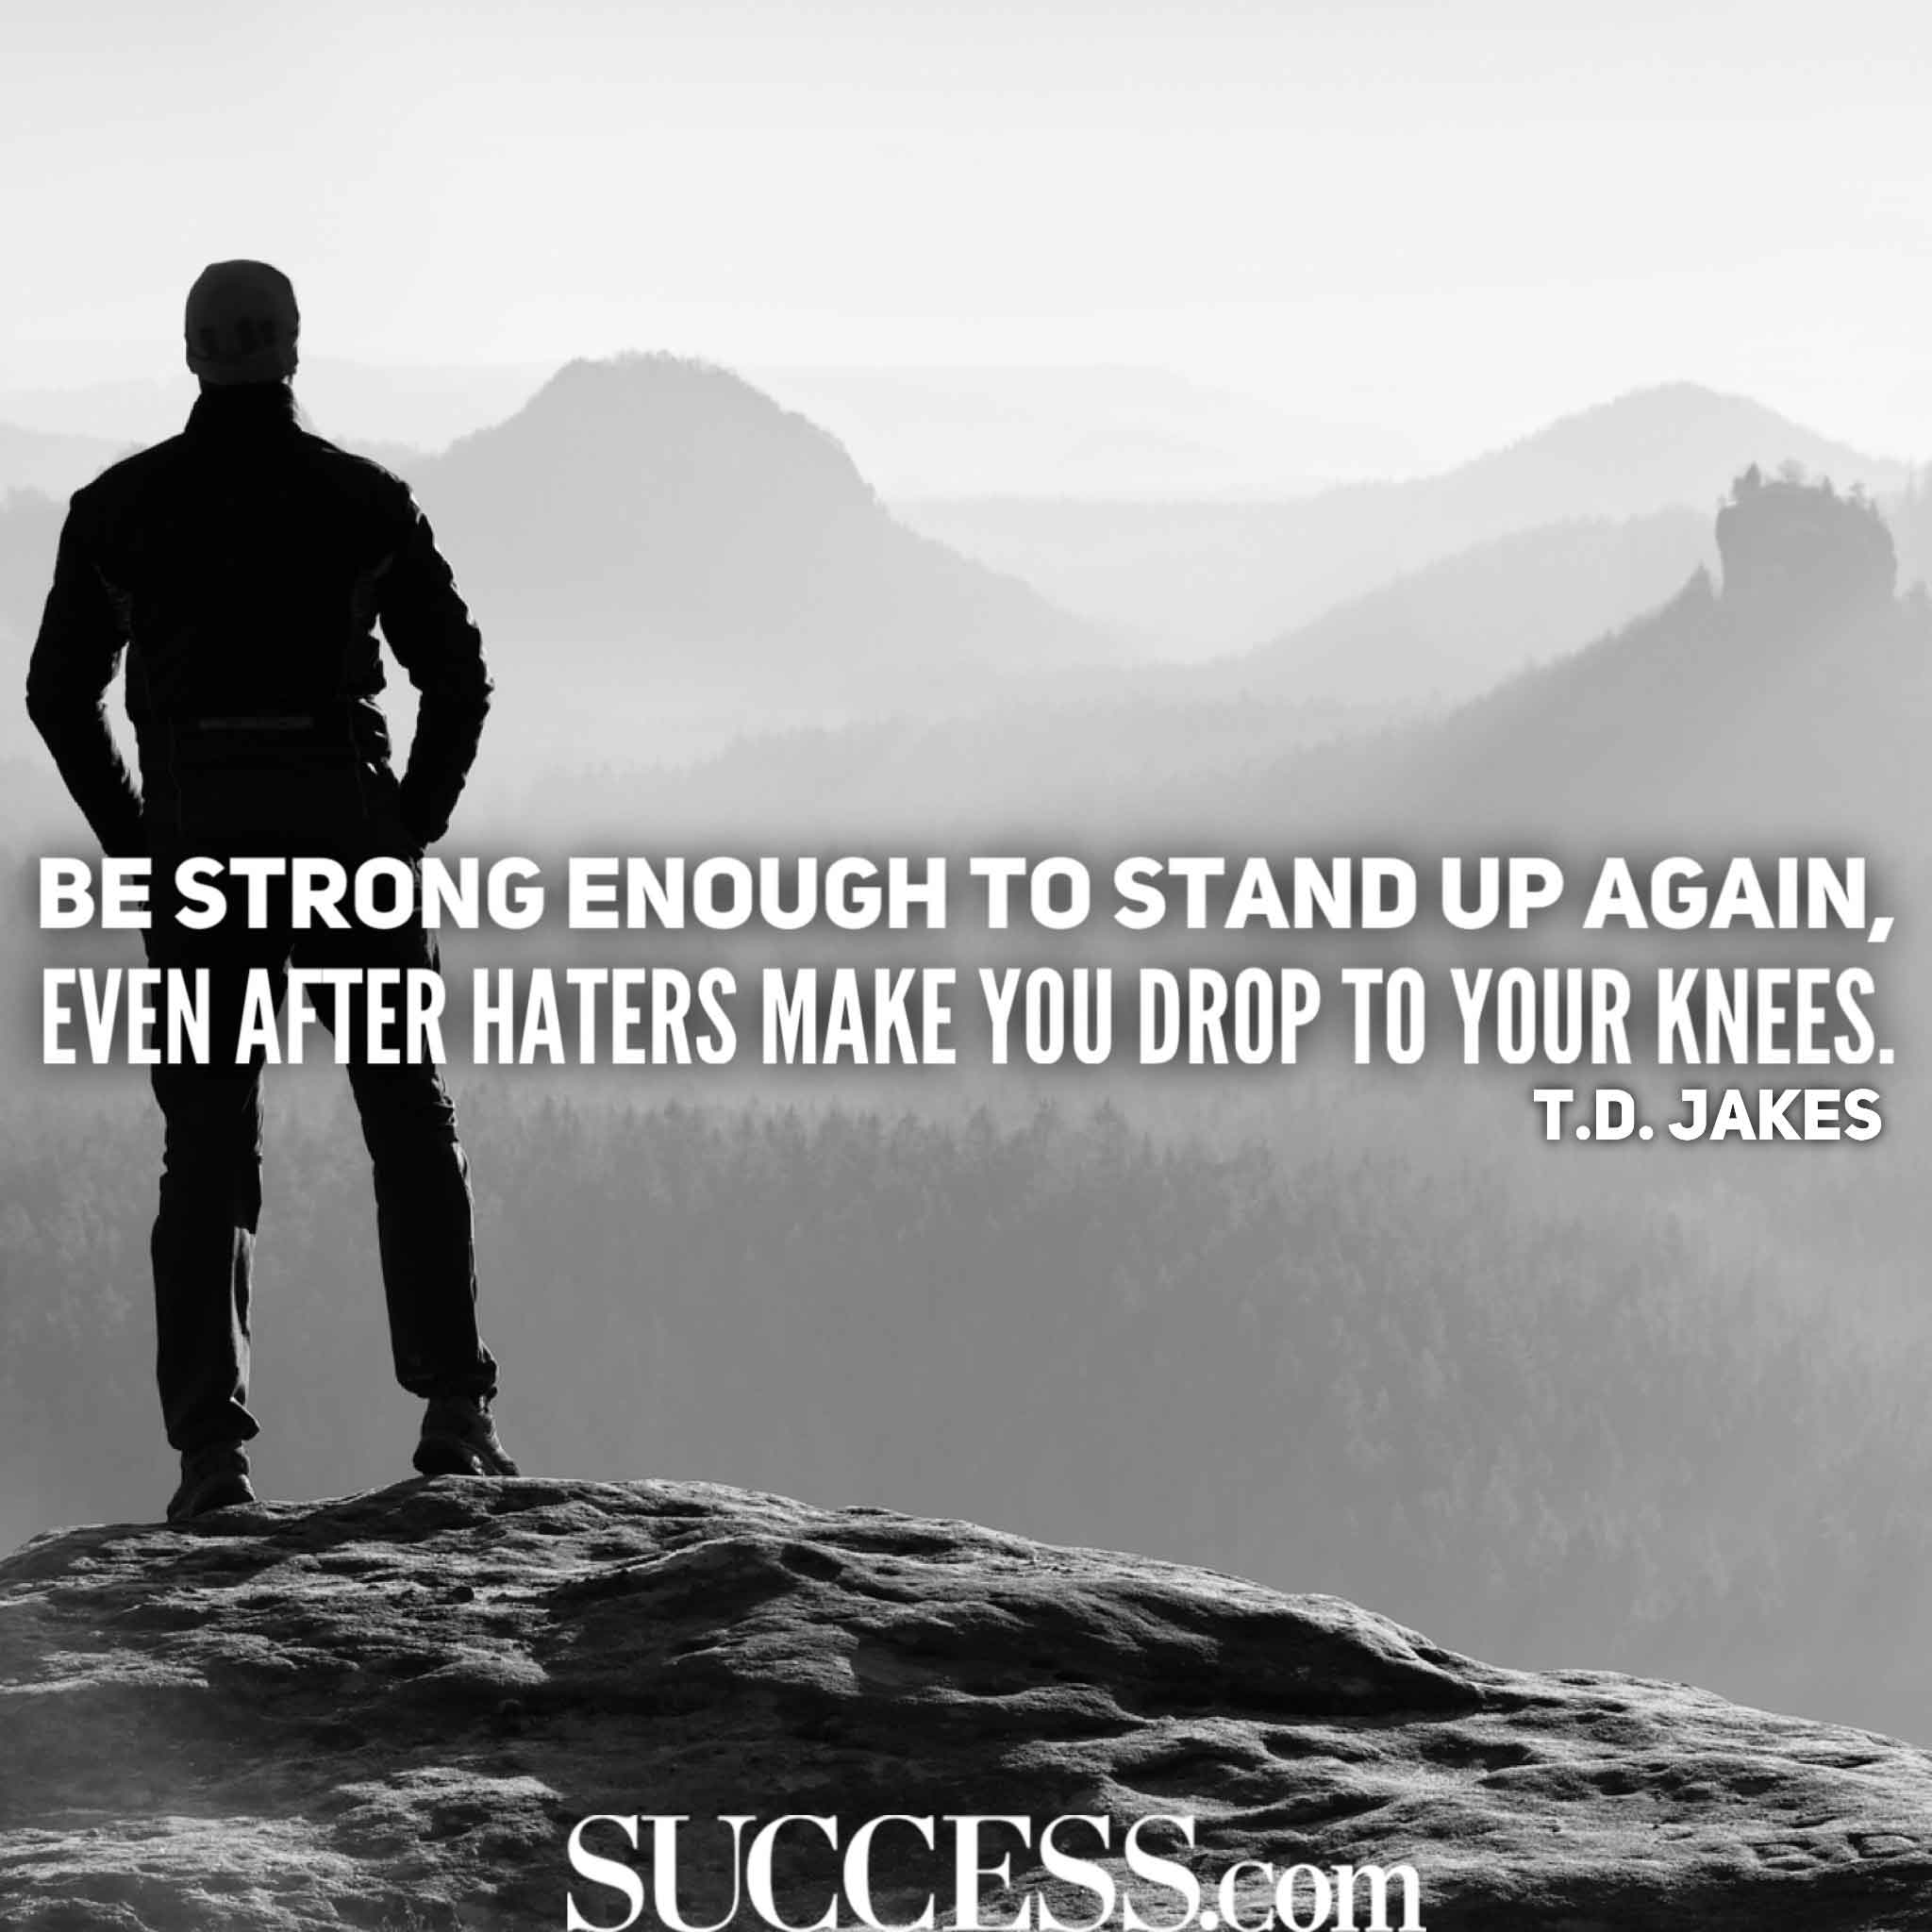 17 Powerful T.D. Jakes Quotes to Push You Forward